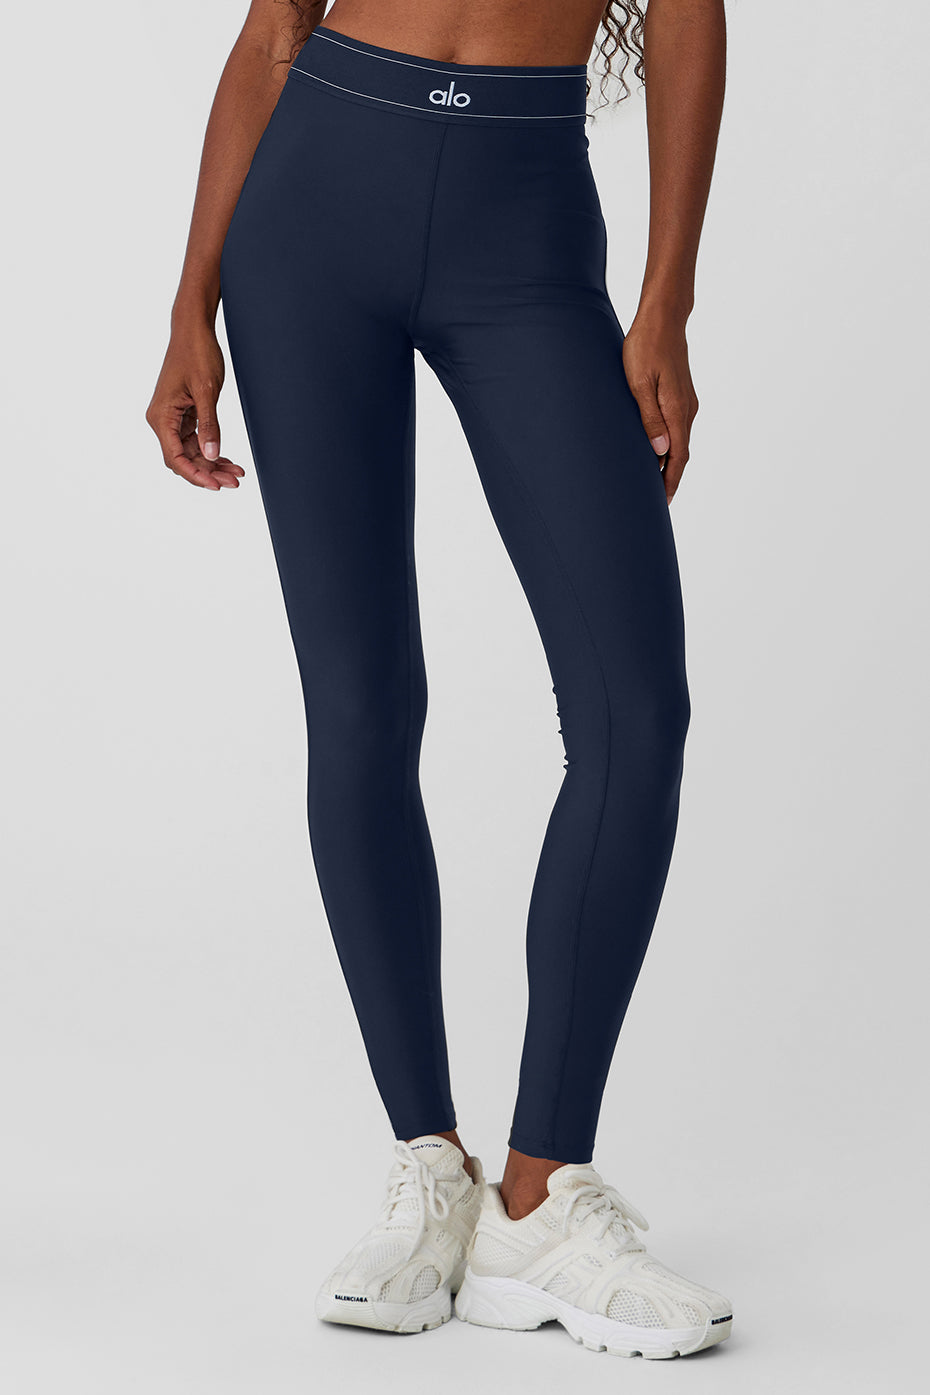 ALO Yoga, Pants & Jumpsuits, Alo Set Airlift Suit Up Bra And Airlift High  Waisted Suit Up Leggings